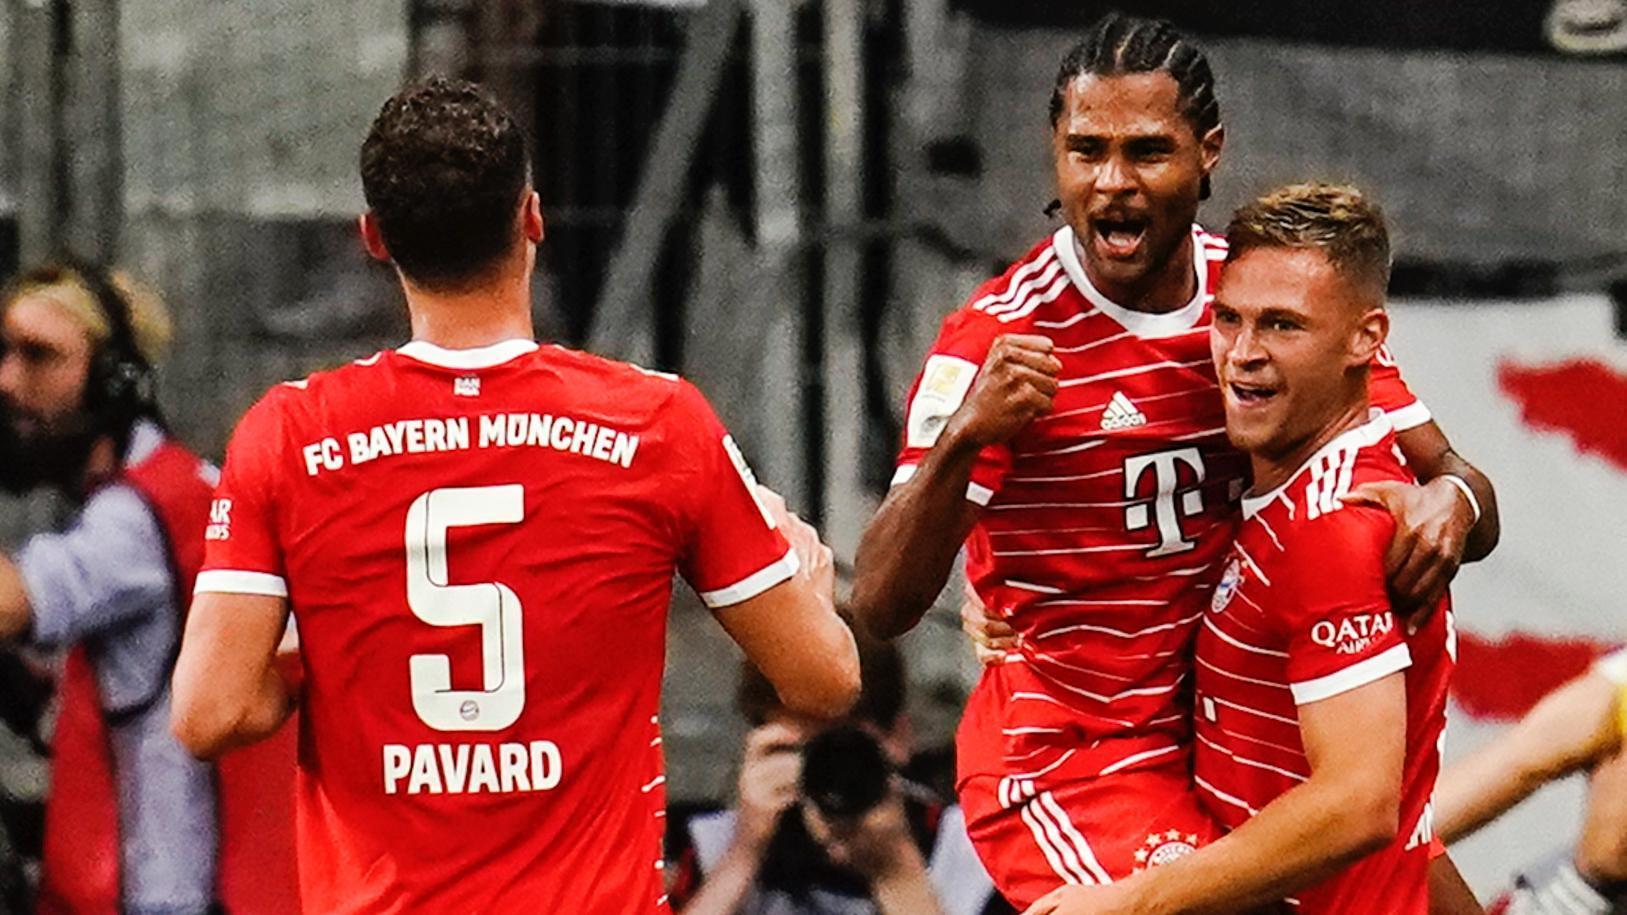 Match schedules for 2022-23 released: Opening match of the 60th Bundesliga  season between Eintracht Frankfurt and FC Bayern München – Bundesliga 2  starts with 1. FC Kaiserslautern against Hannover 96